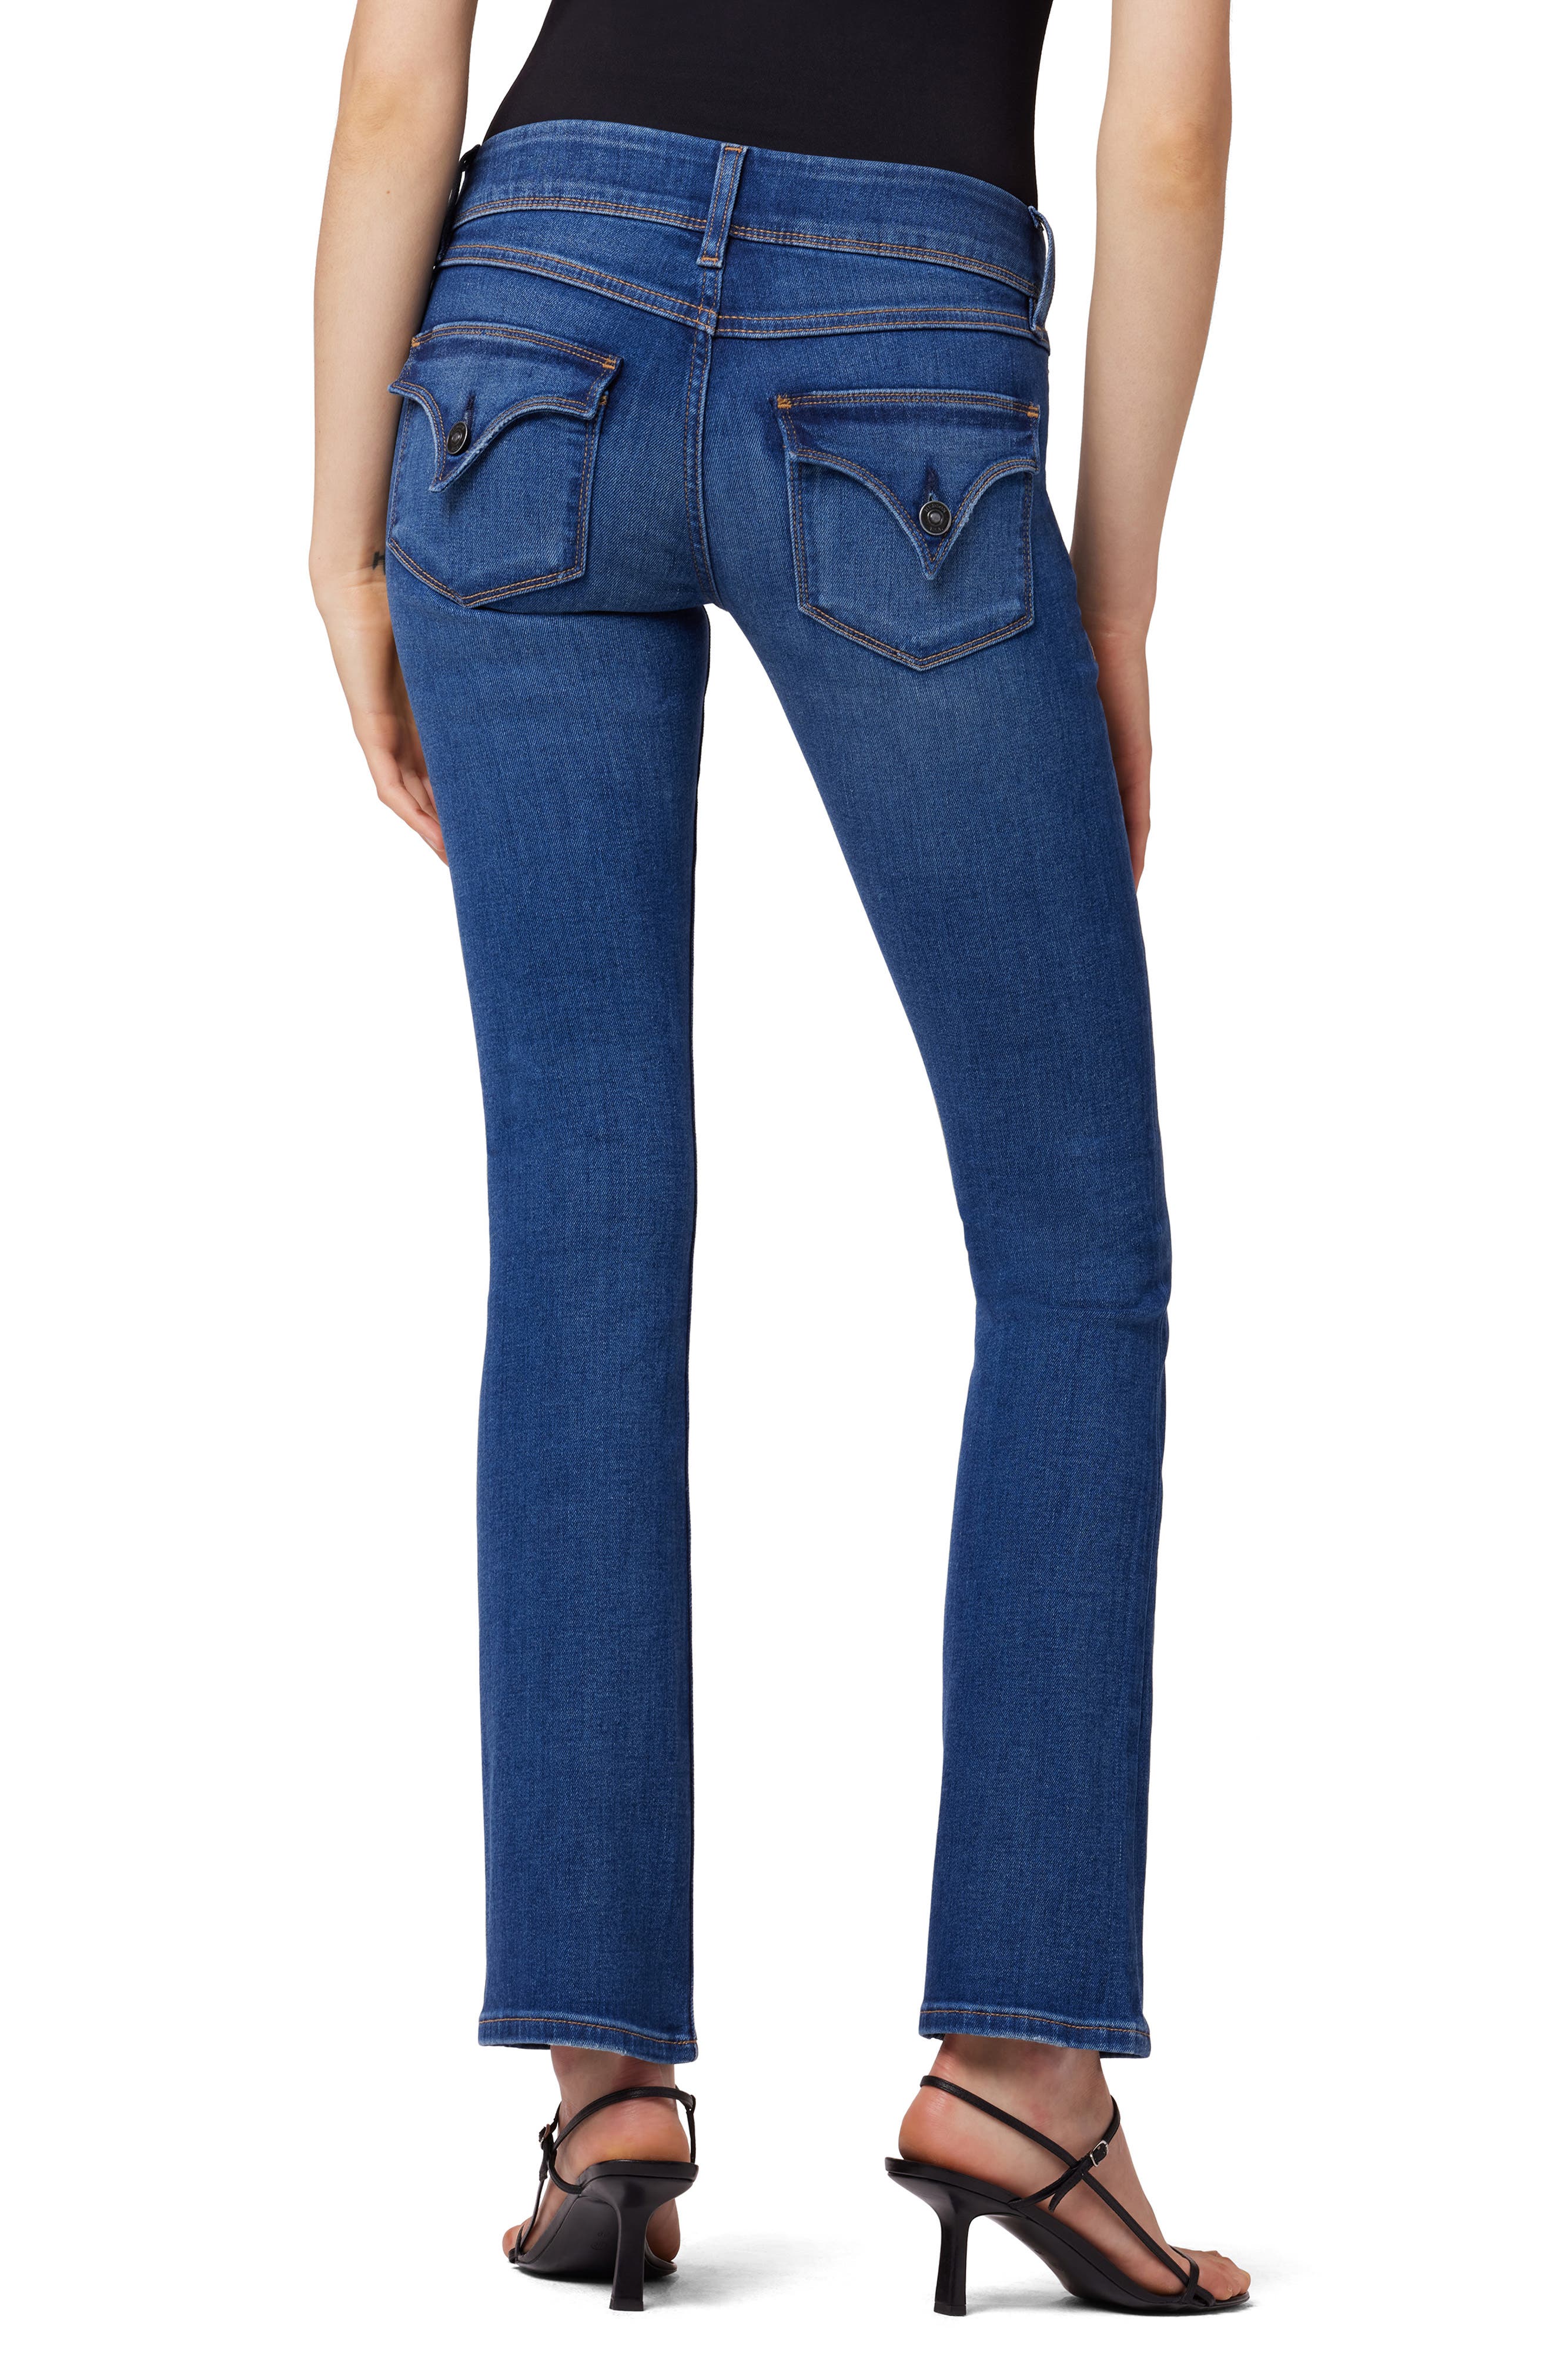 Hudson Jeans Womens Signature Boot Jean in Hackney